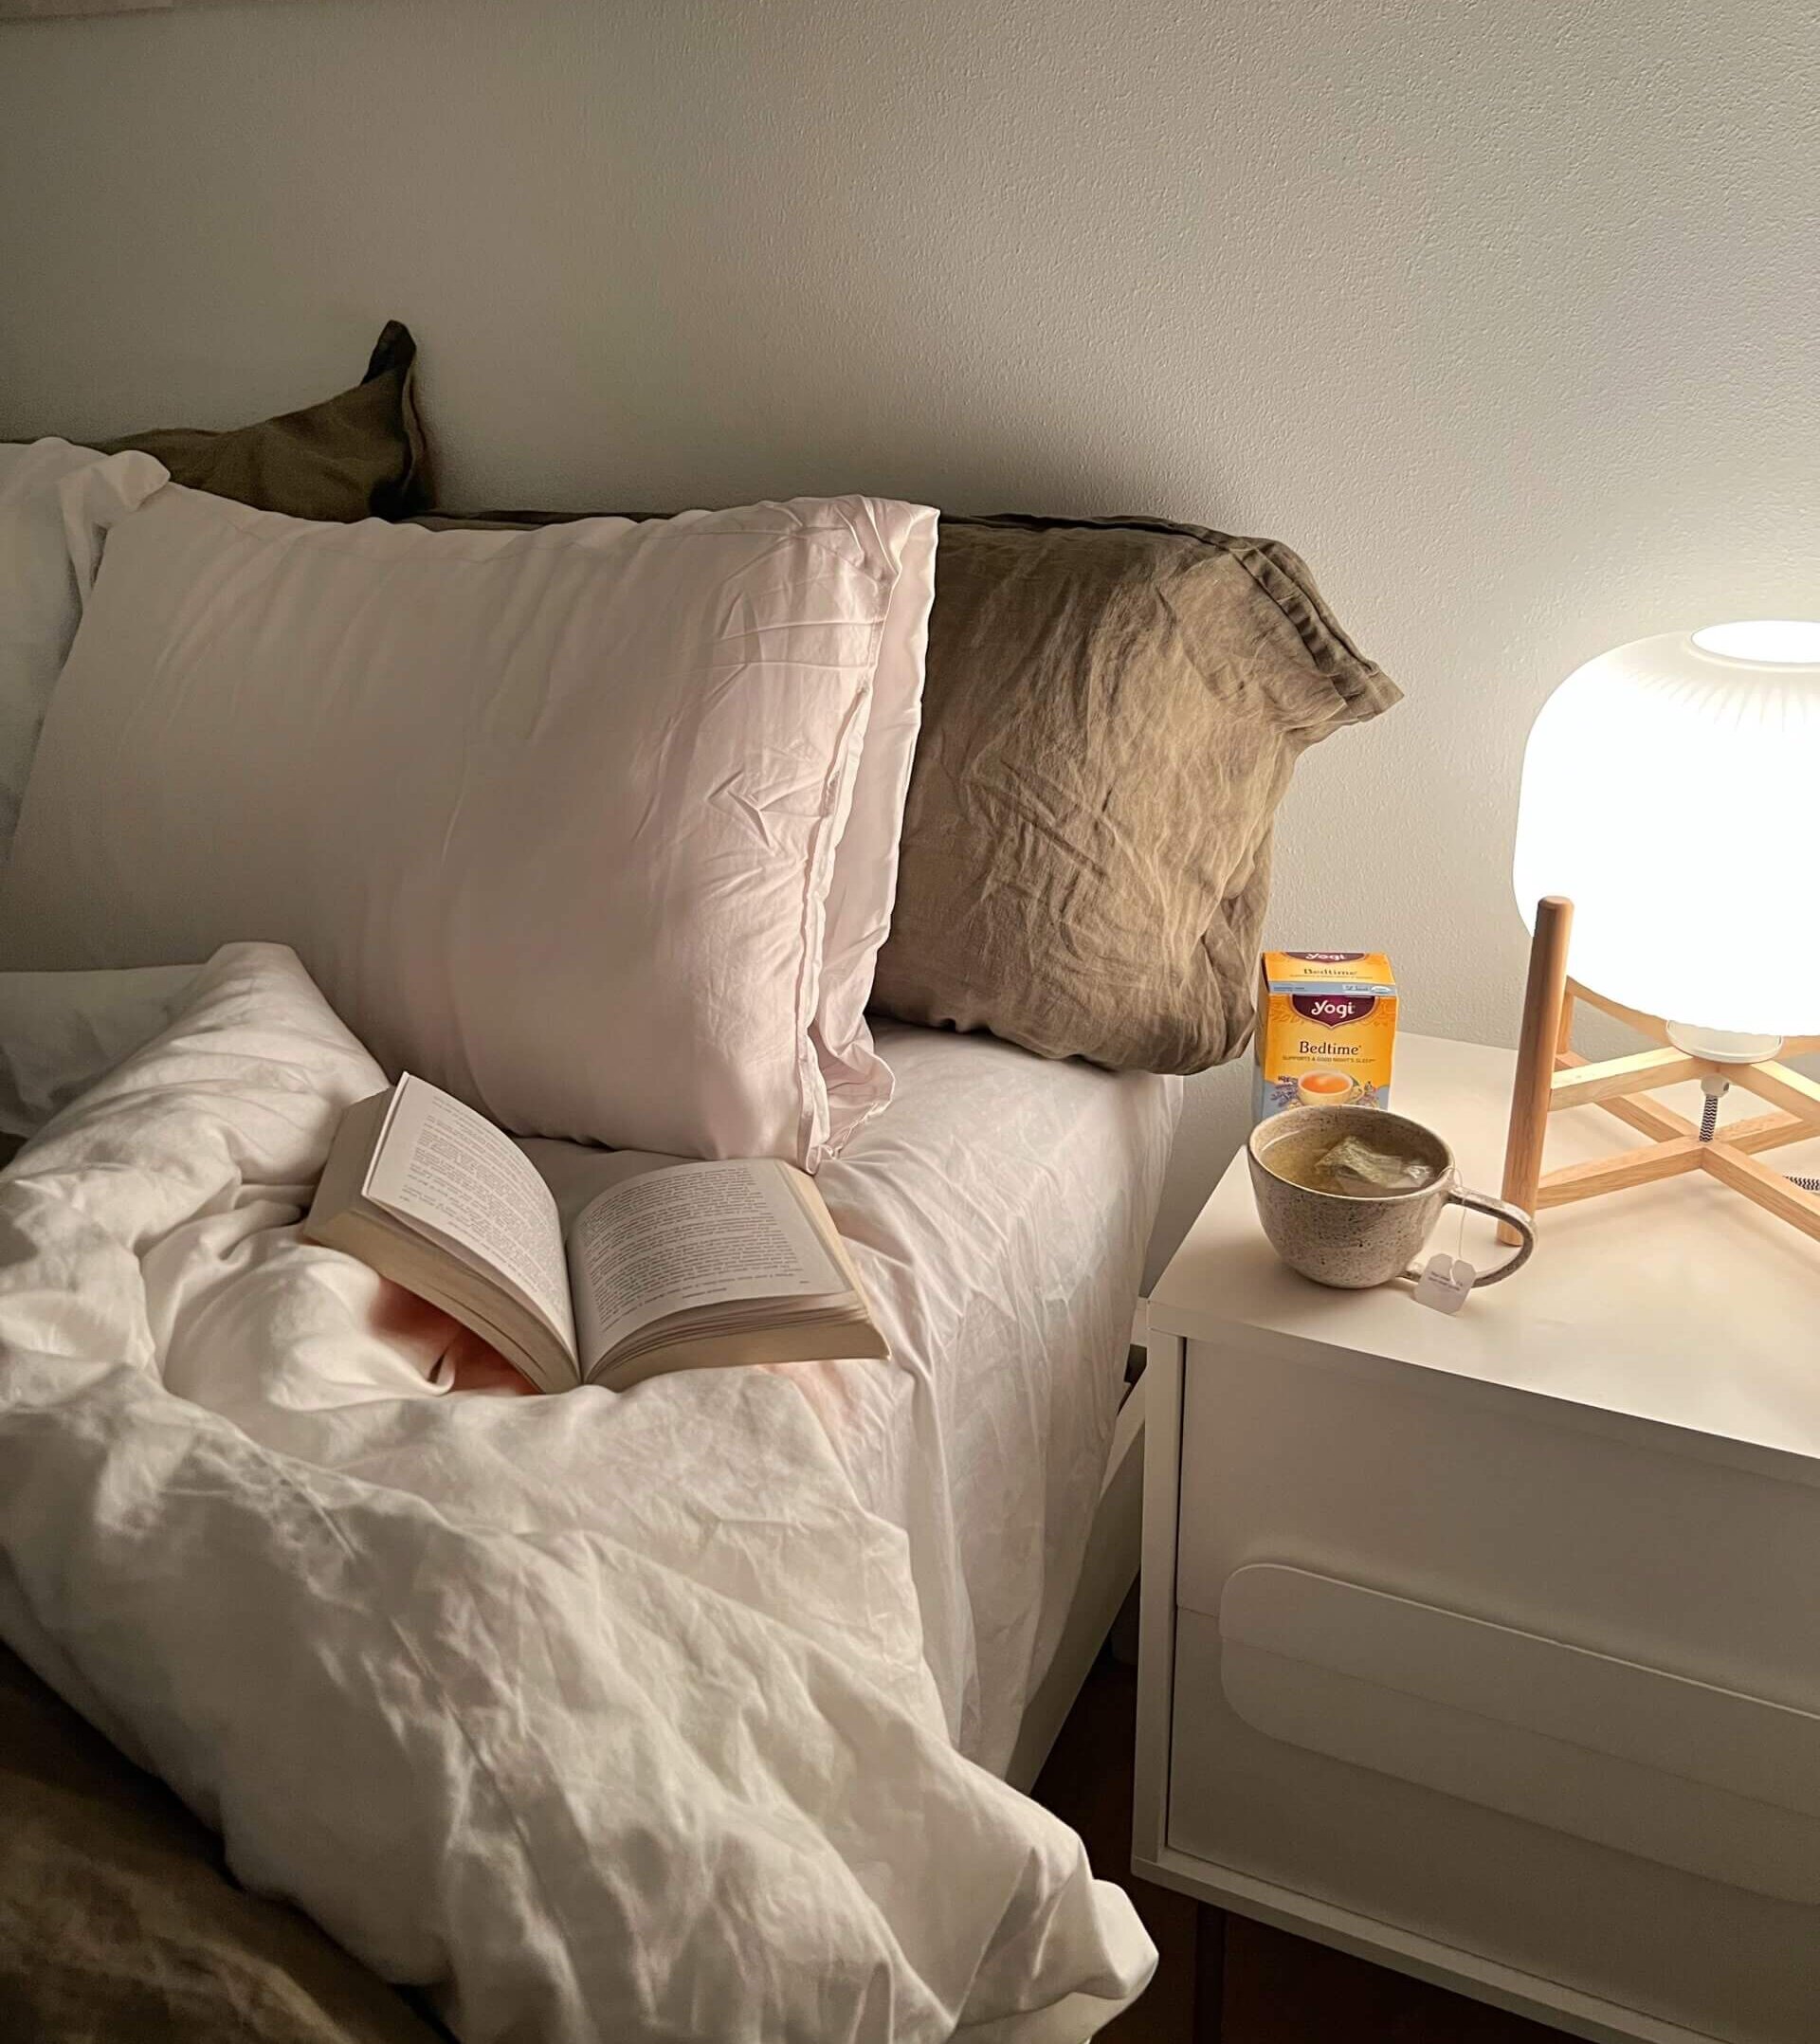 Bed with open book resting on it. A cup of tea sits on the nightstand